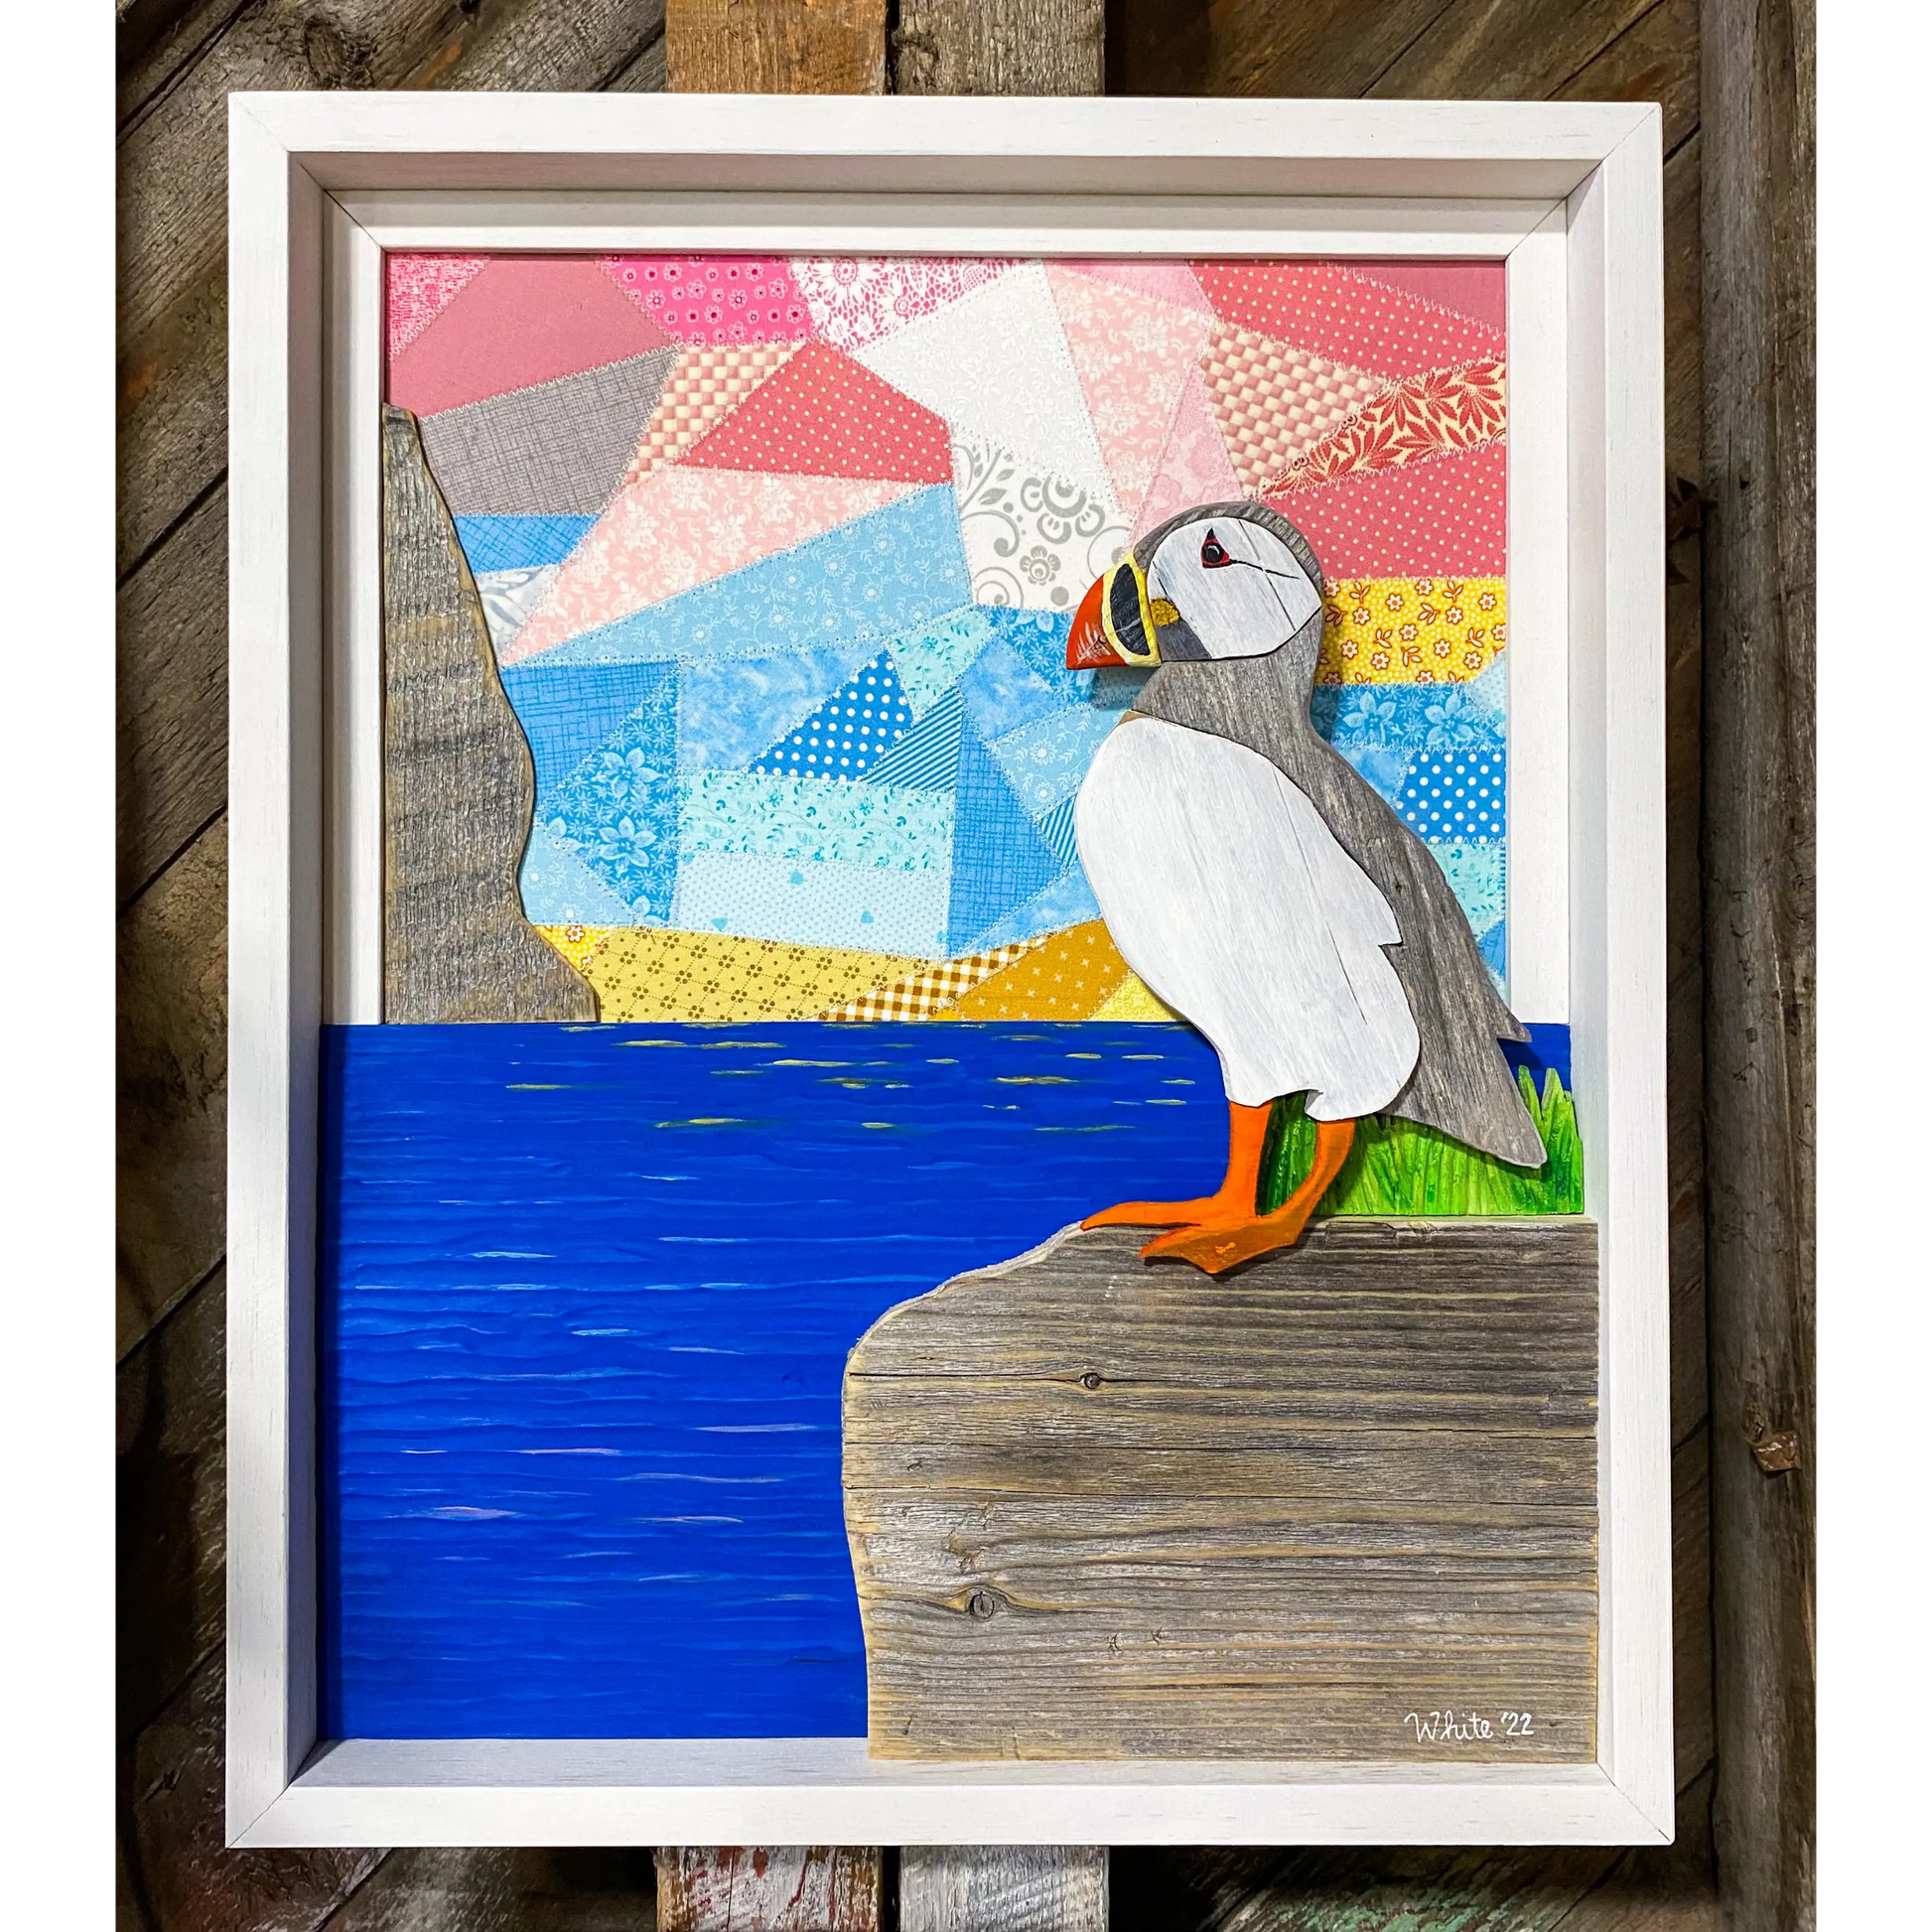 "Spring Views" is an original driftwood mixed-media art piece that captures a puffin standing on a rock over looking the water. 